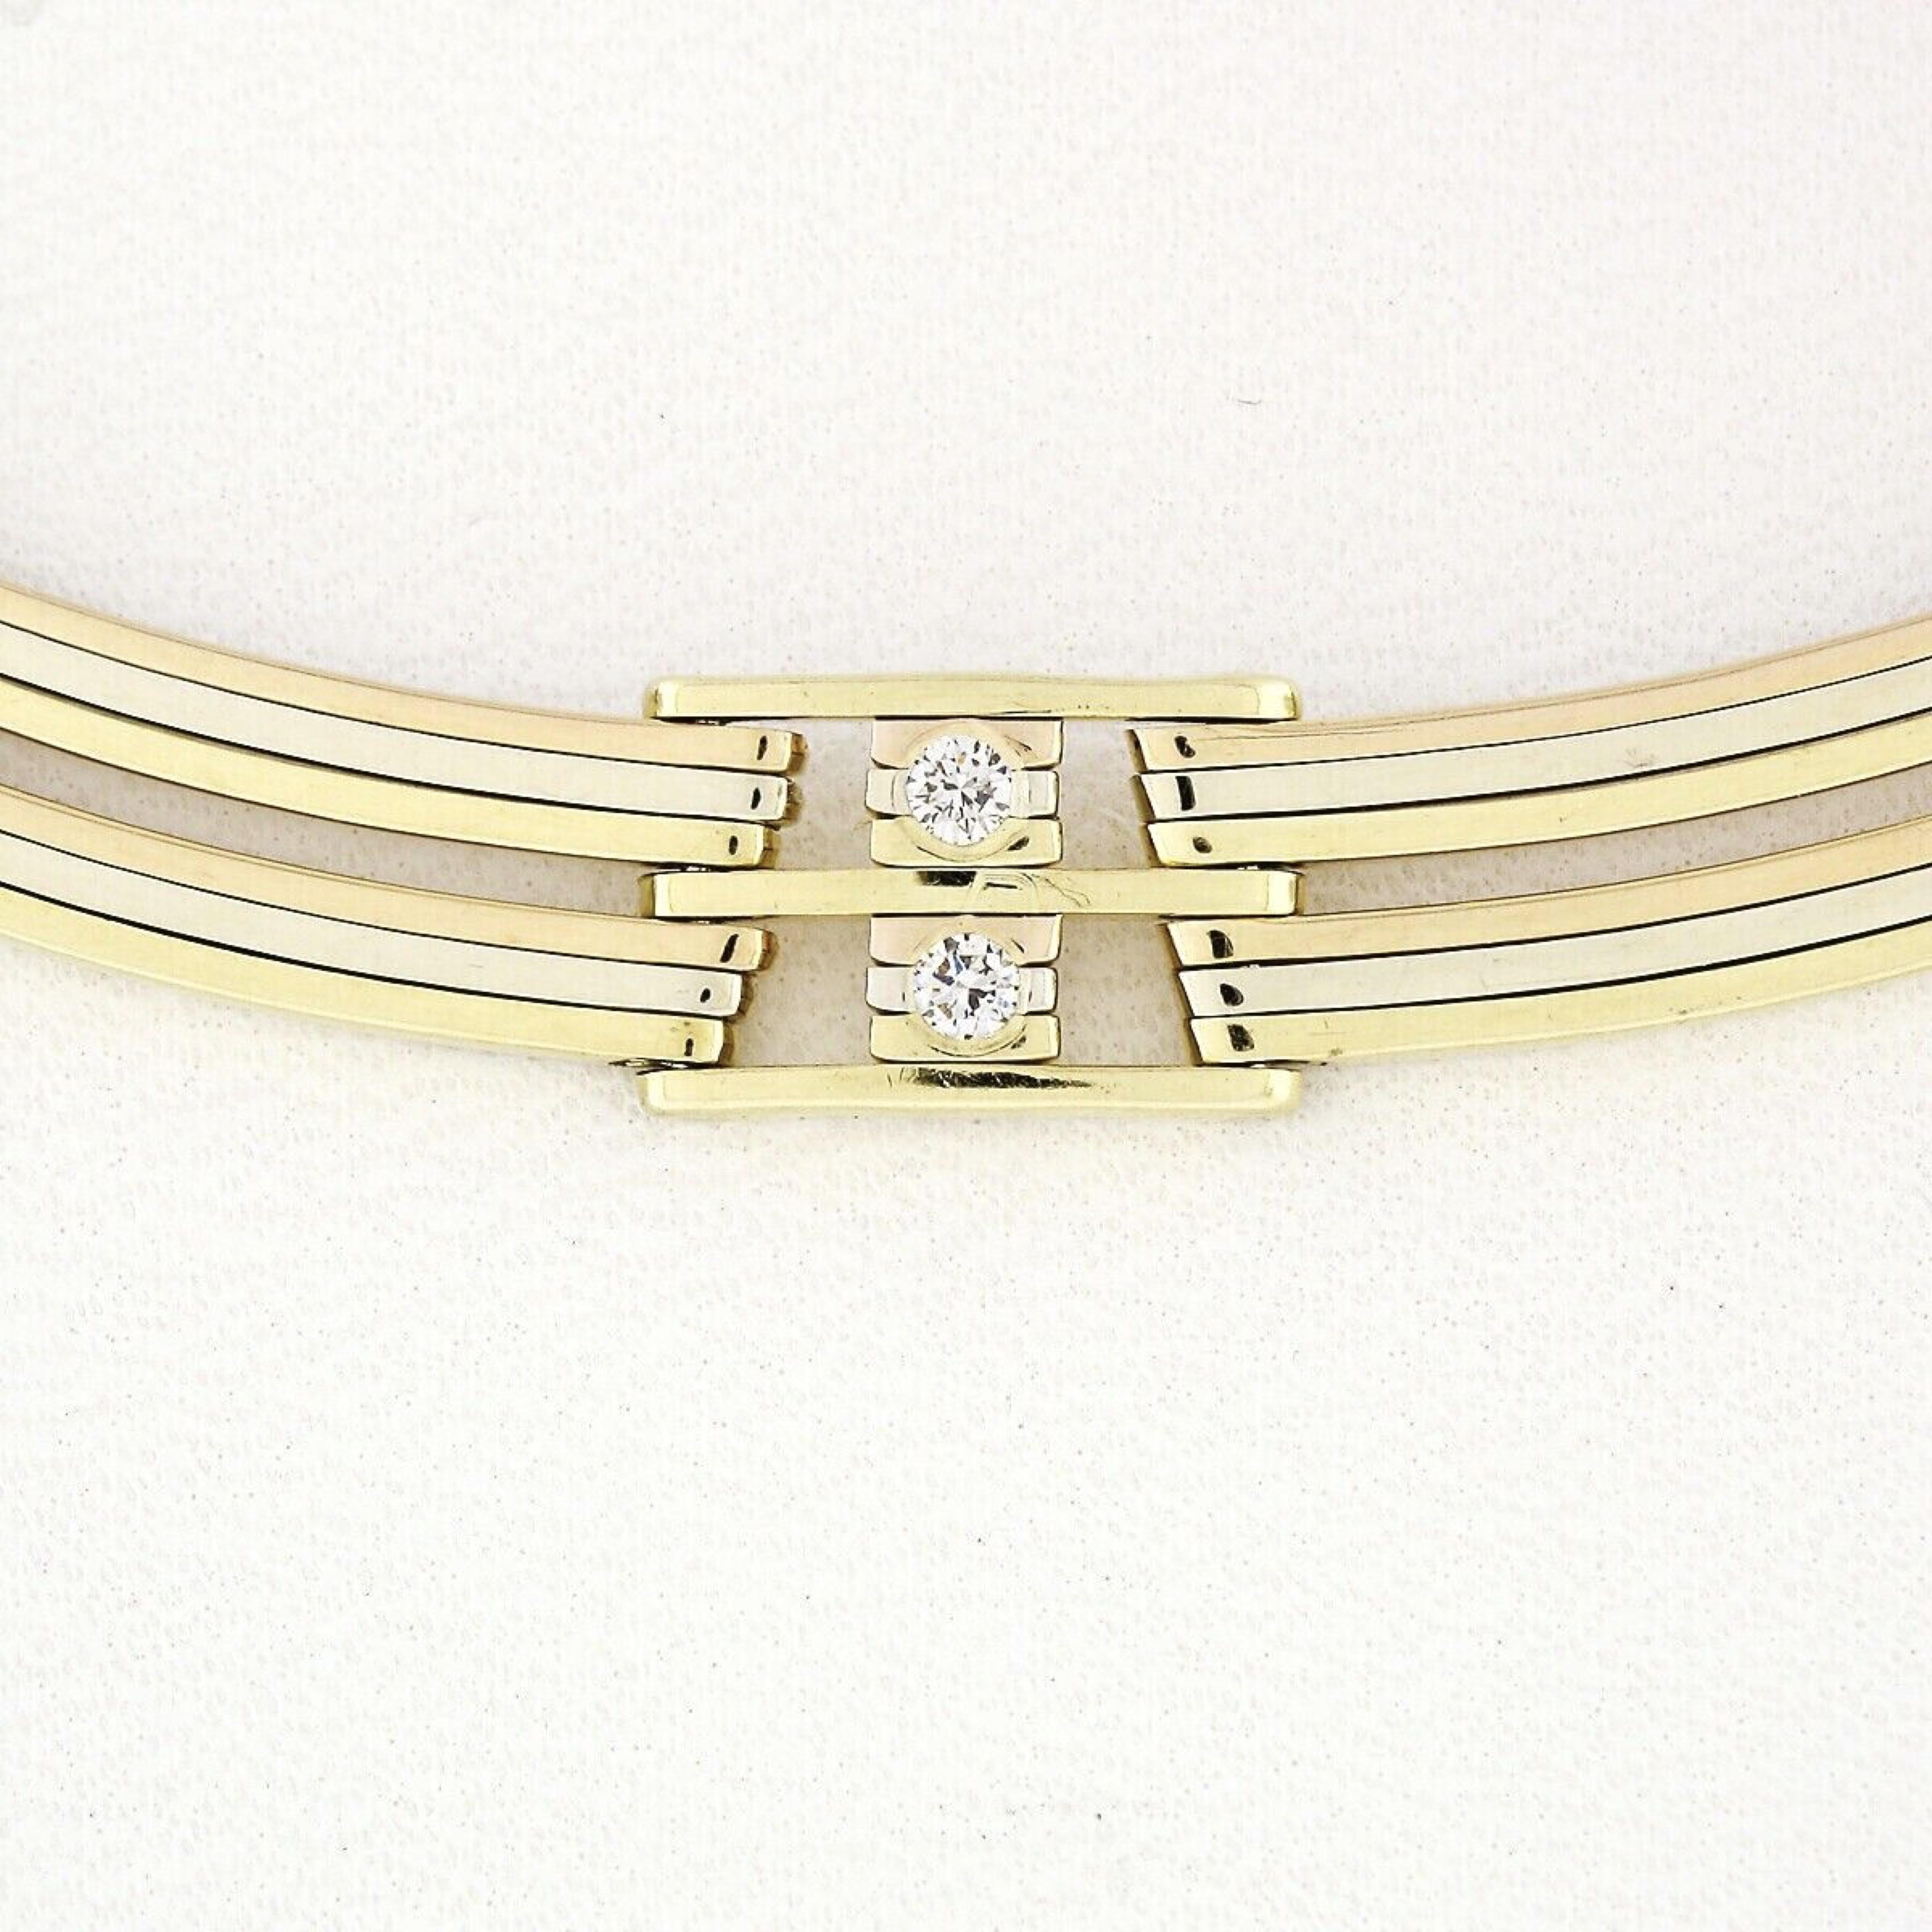 Here we have a very well and solidly made diamond collar necklace designed by Chimento in Italy and crafted in solid 18k yellow, rose and white gold throughout. The necklace features a truly unique design. It features individual perfectly covered